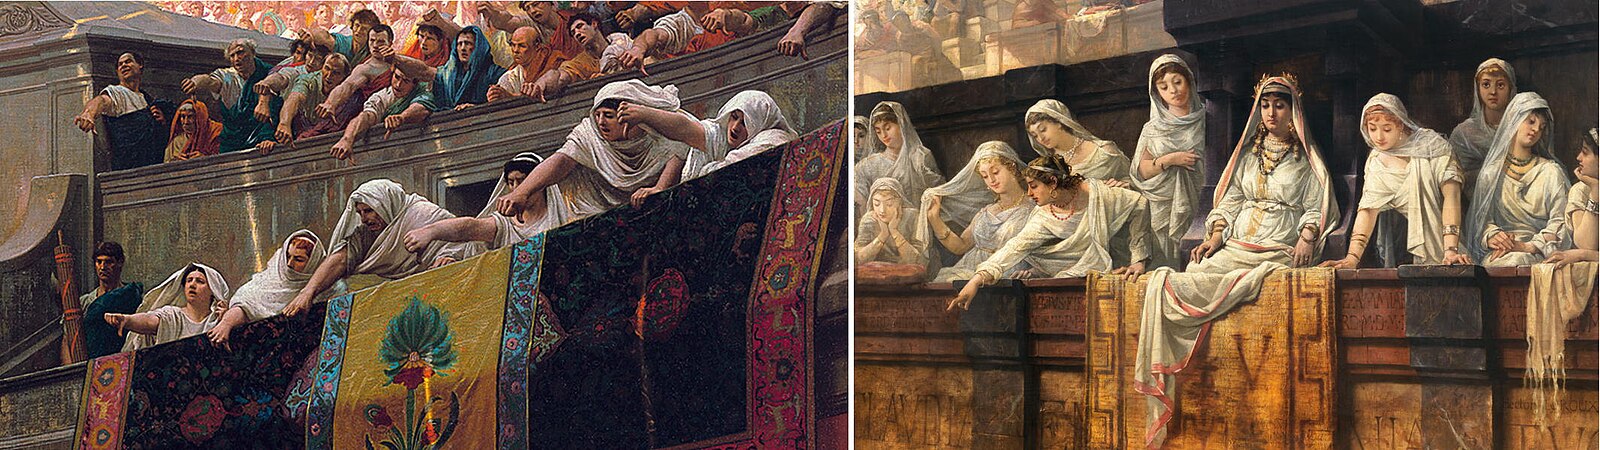 Two starkly different views by two French Academic painters of the Vestals in their front-rows seats at the Roman Colosseum: Pollice Verso (Thumbs Down), 1874, by Jean-Léon Gérôme (detail; Phoenix Art Museum), and the Vestals in a painting by Hector Leroux, c. 1890 (private collection).